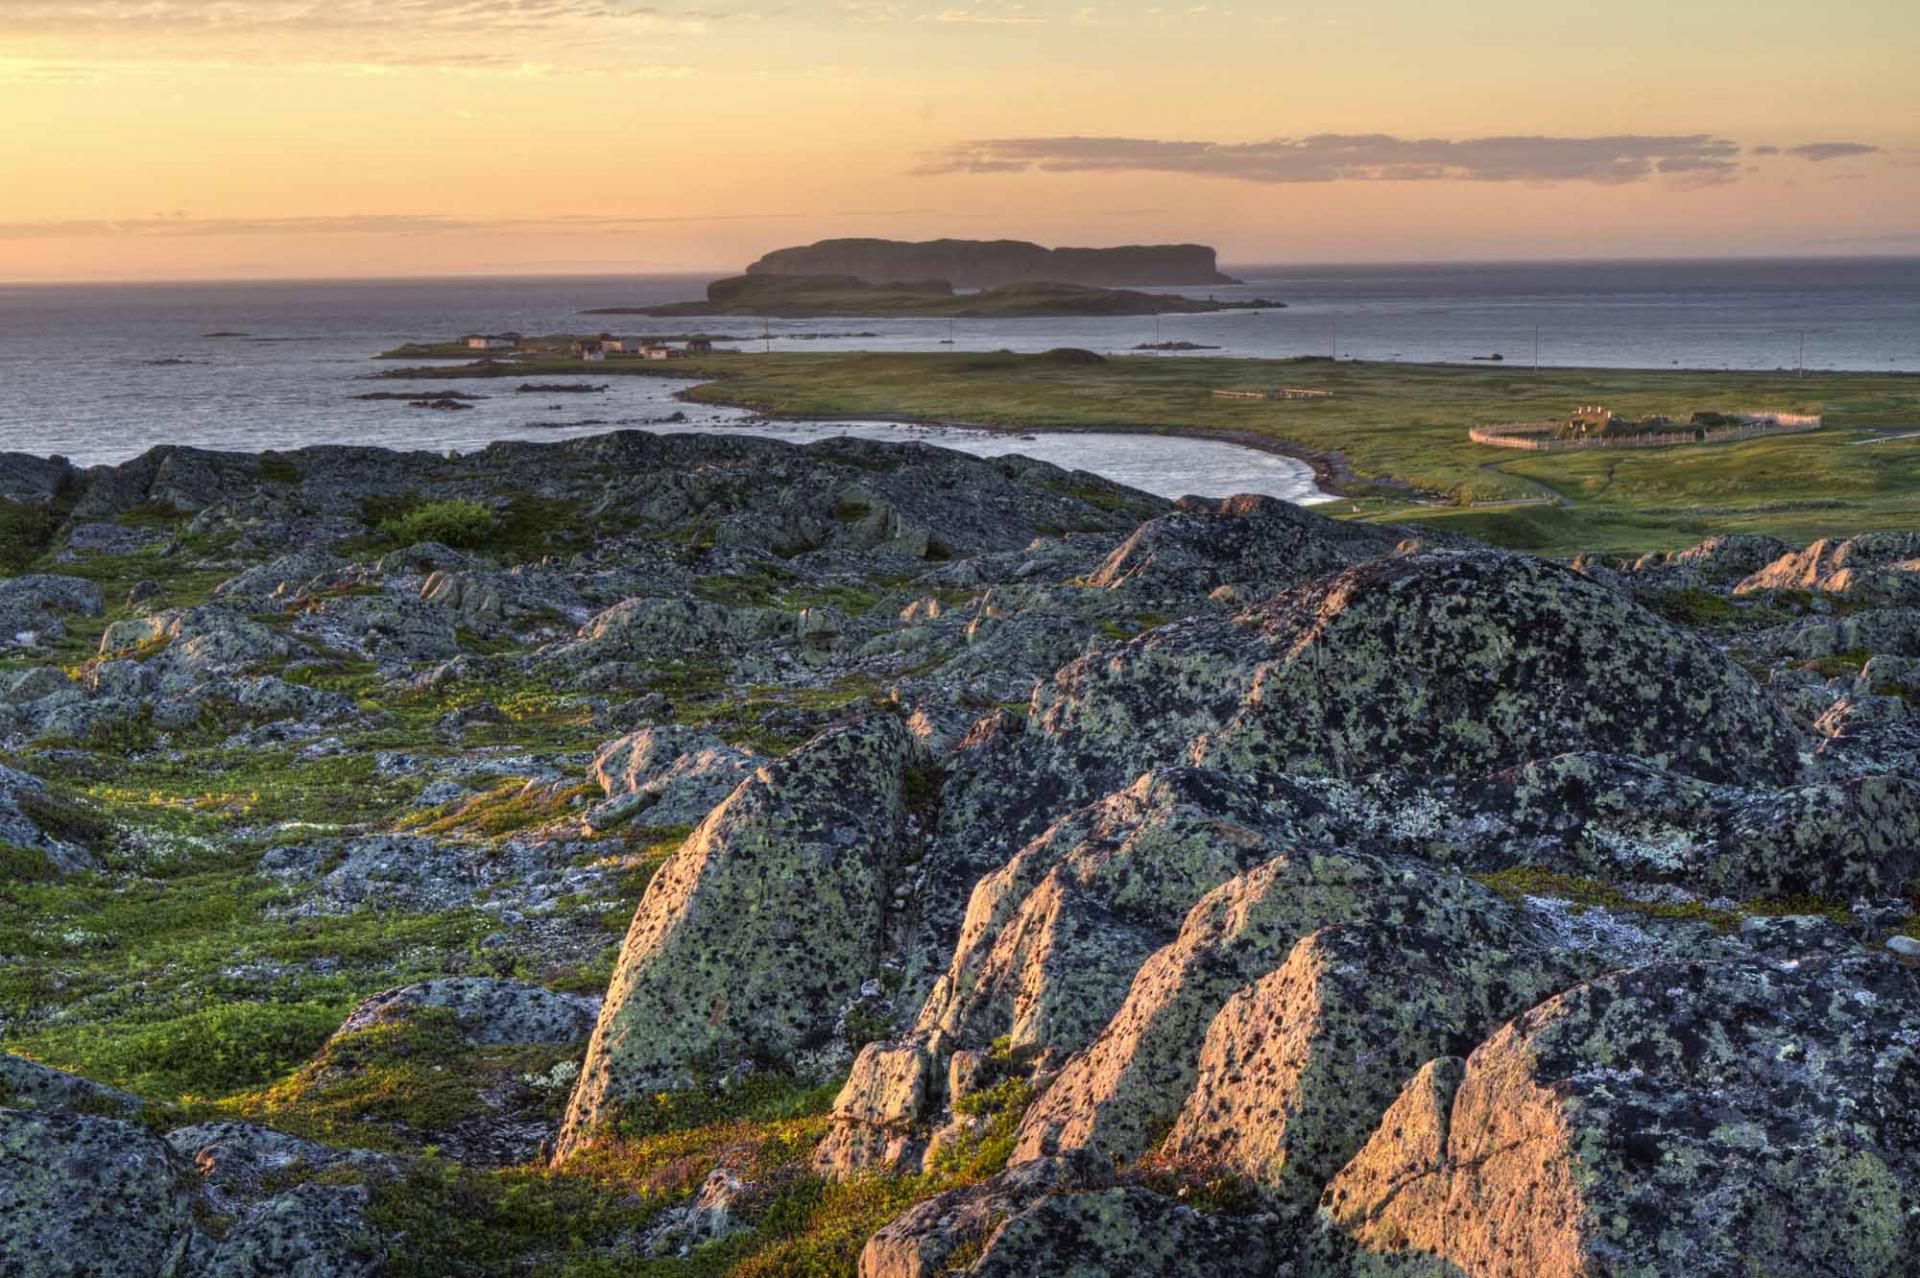 Canada - L'Anse aux Meadows - Photo: Colin Young / Dreamstime